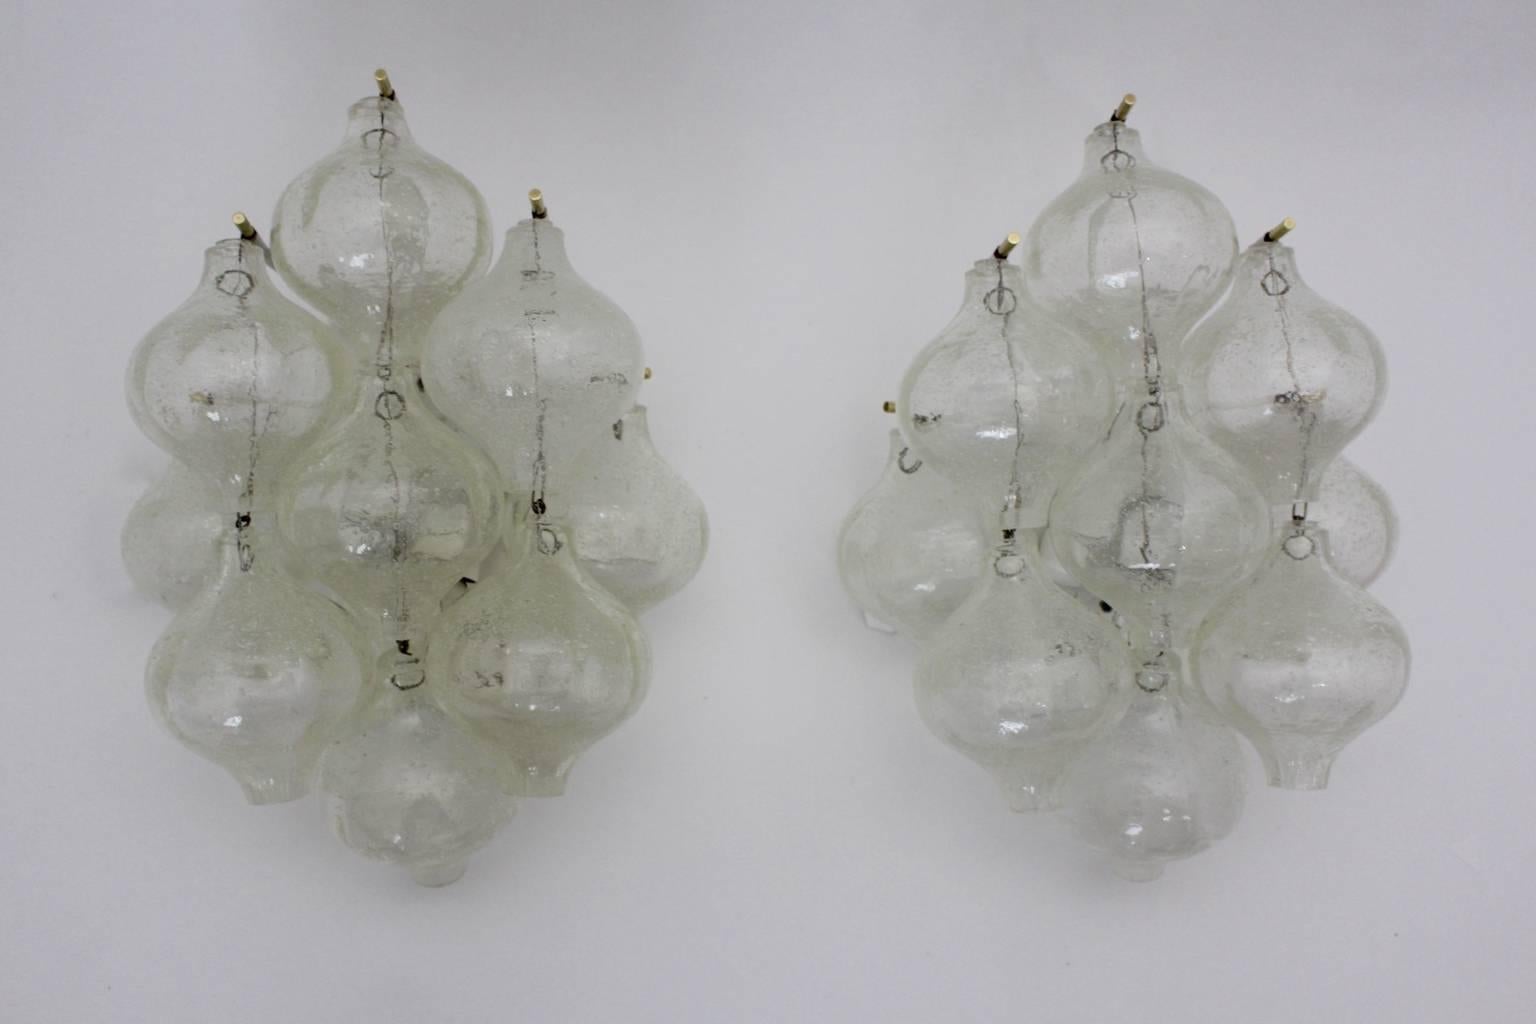 A beautiful timeless pair of mid century modern Tulipan sconces by J. T. Kalmar executed by Kalmar, Vienna, 1960.
Paper label on the backside.
Nine handblown glass bubbles are mounted on a white enameled metal frame with brass details.

The sconces